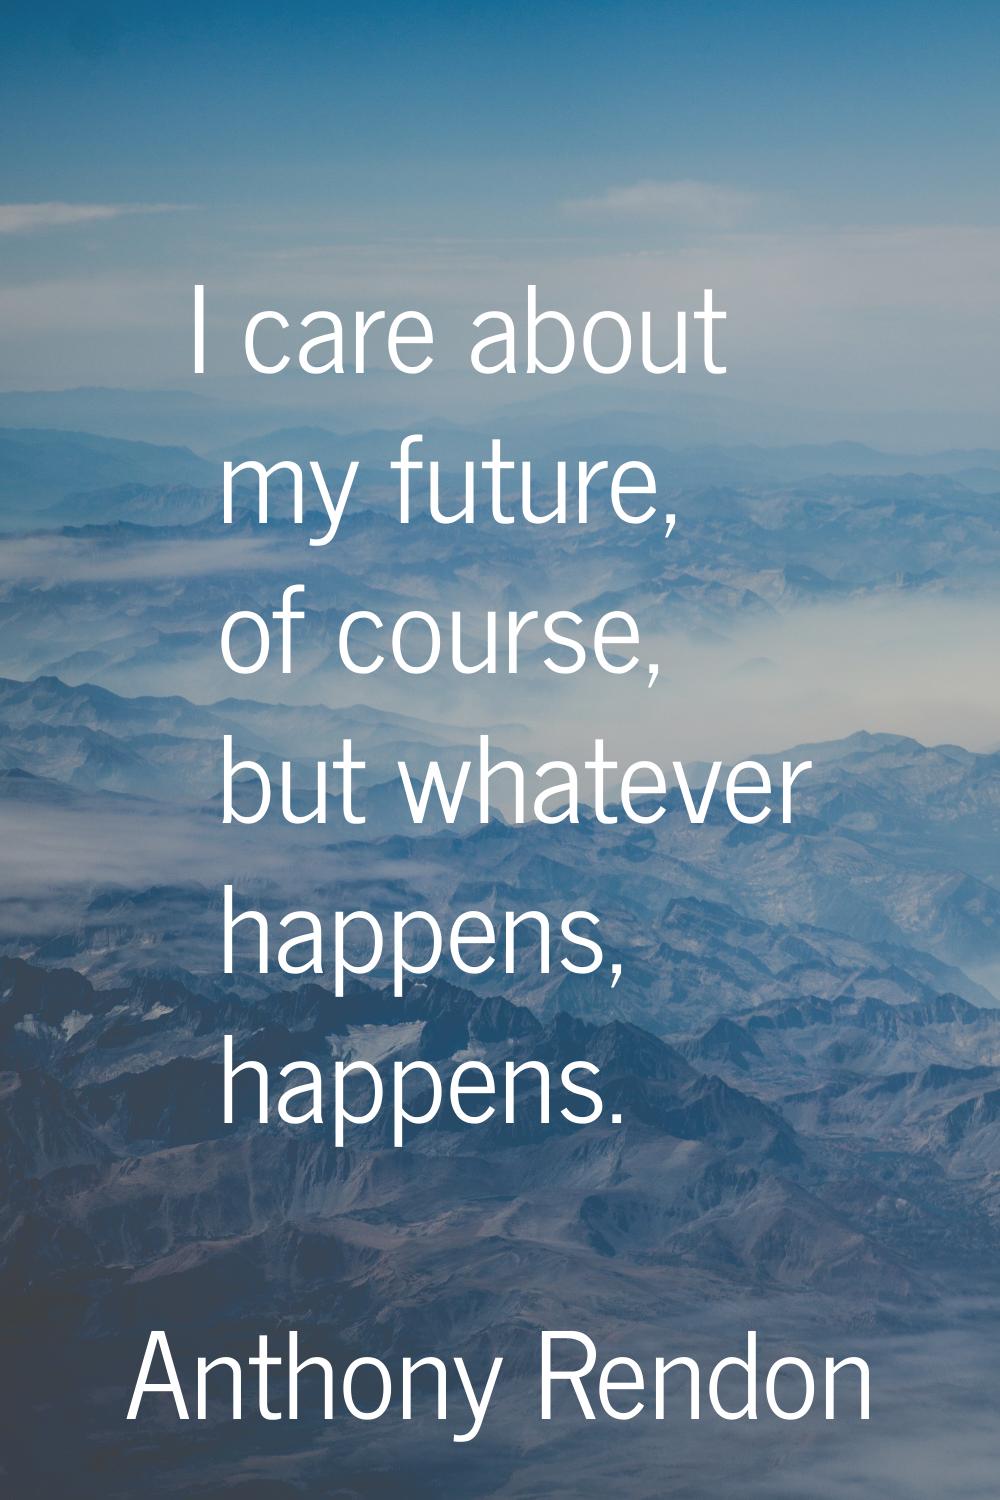 I care about my future, of course, but whatever happens, happens.